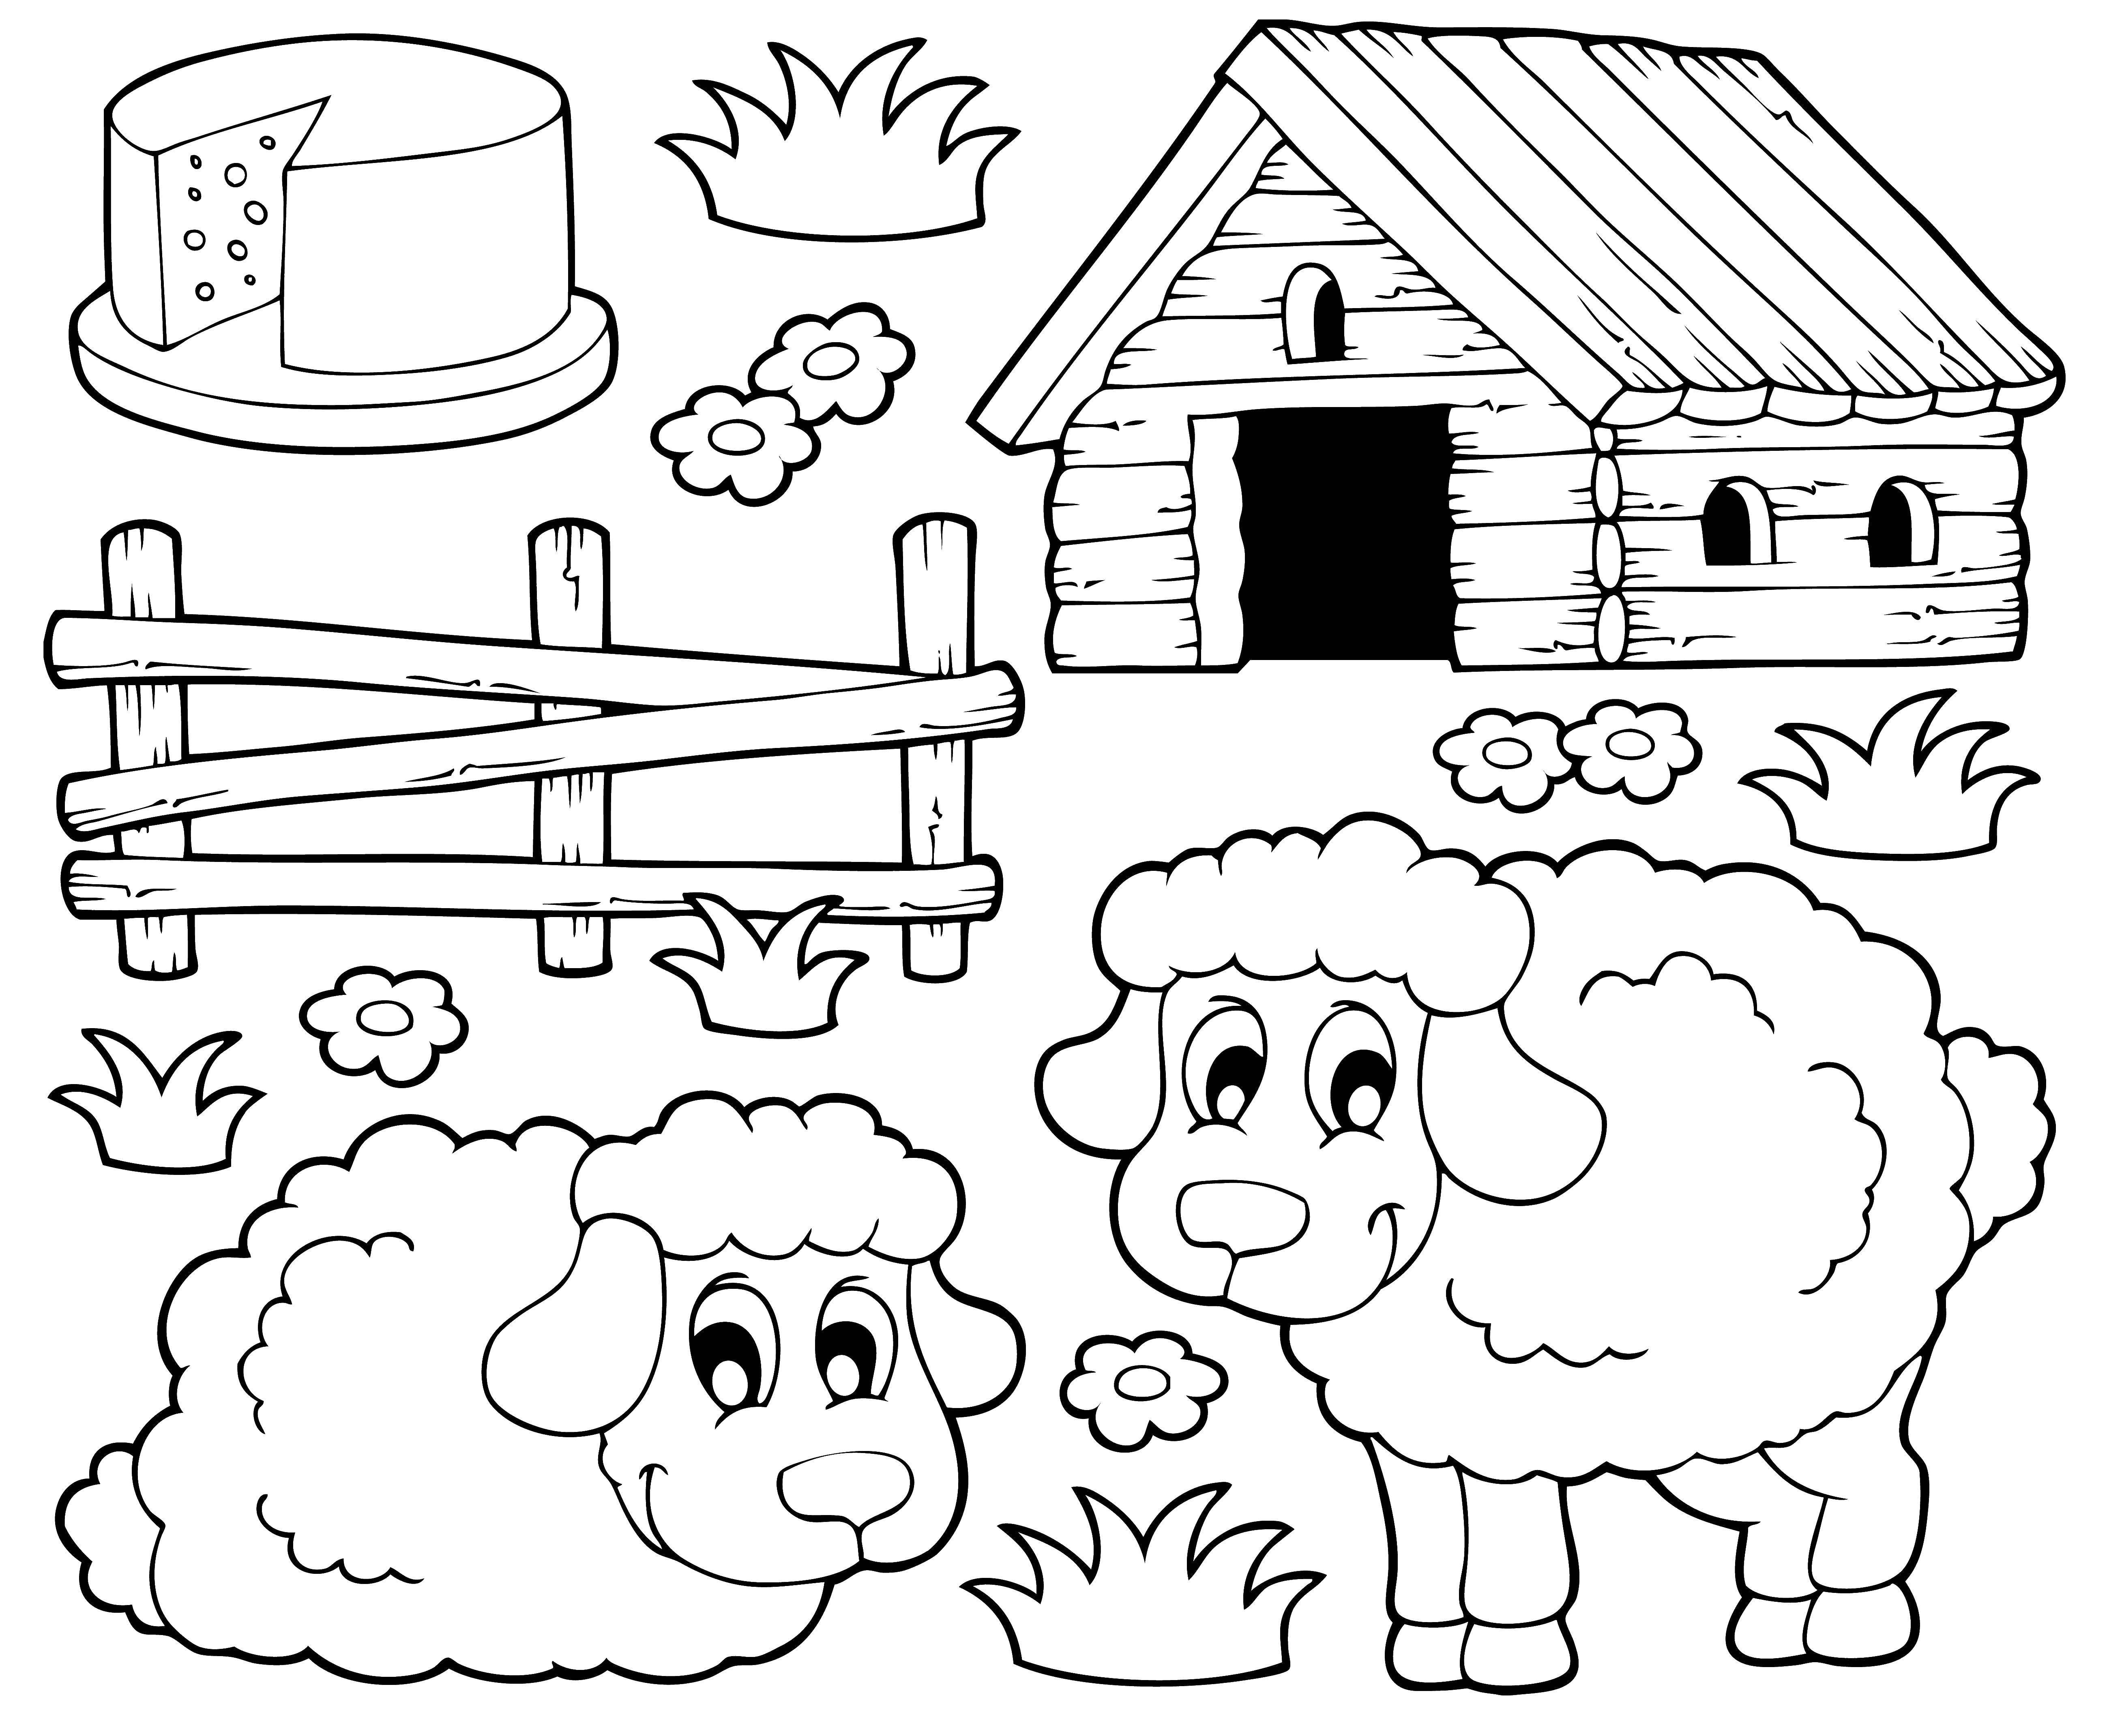 Coloring Sheep in the house. Category the village. Tags:  village, cattle, sheep, house.